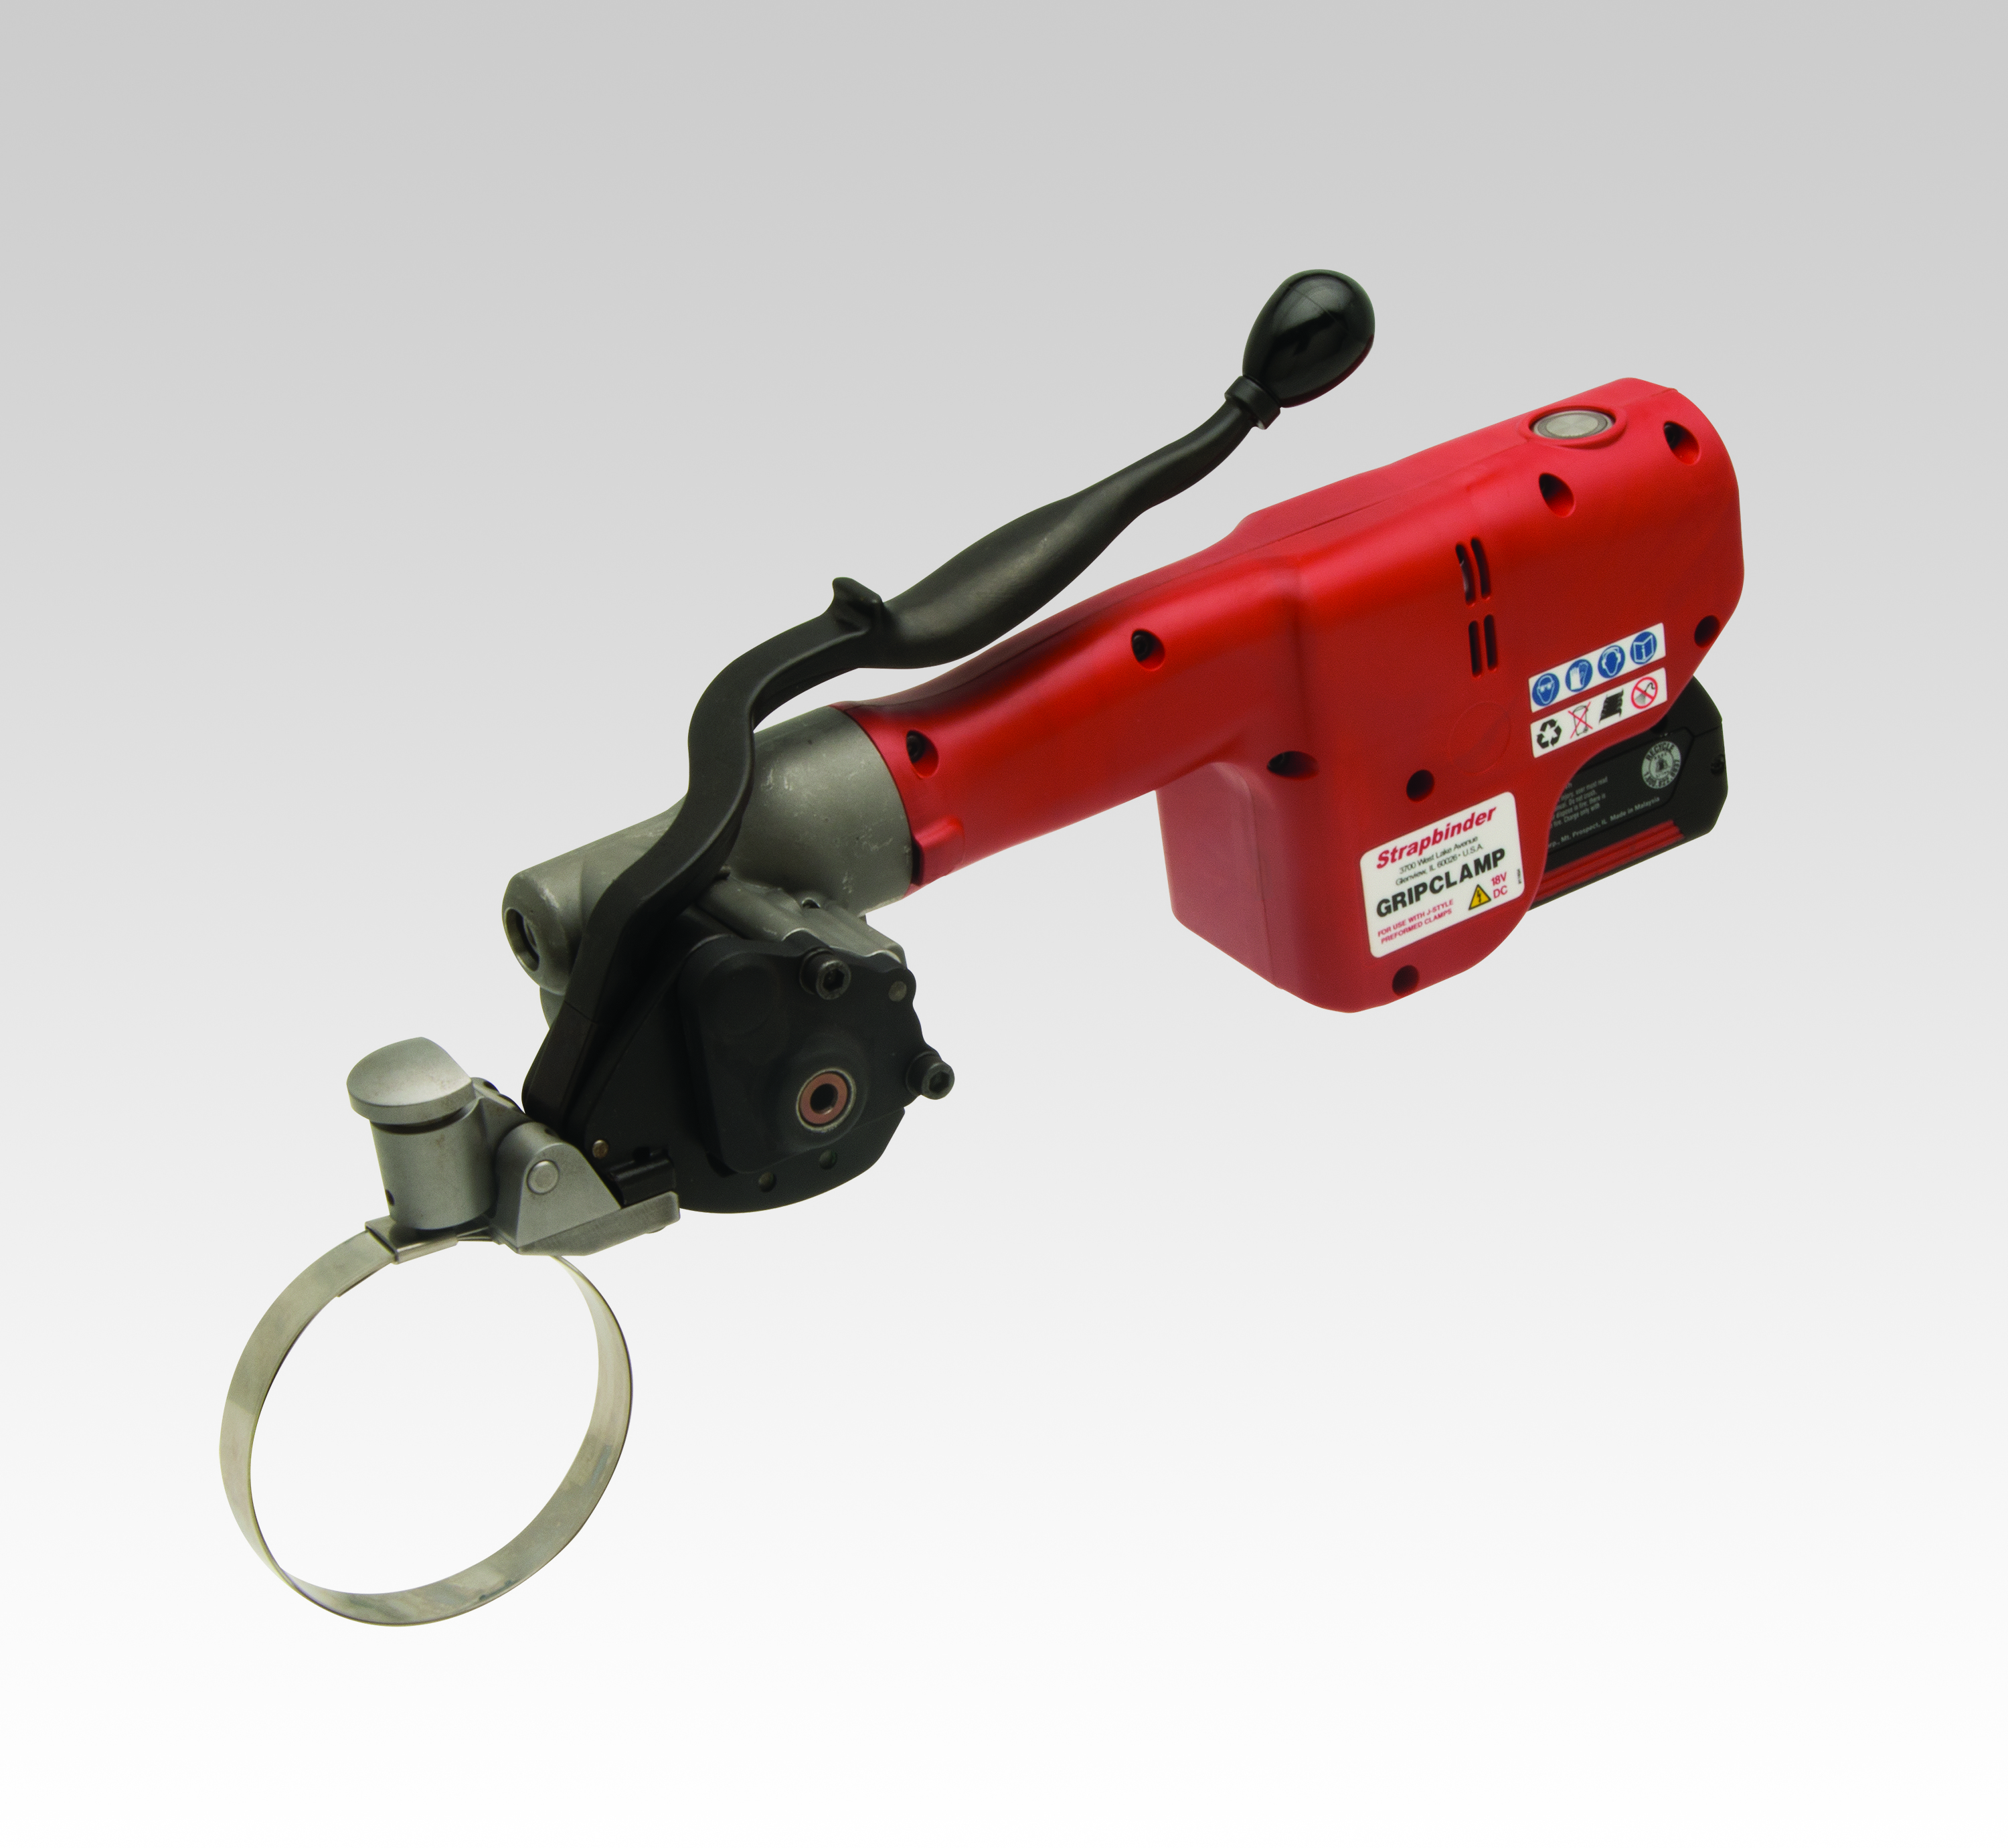 Grip Clamp Center Punch Tensioning Tool | Strapbinder